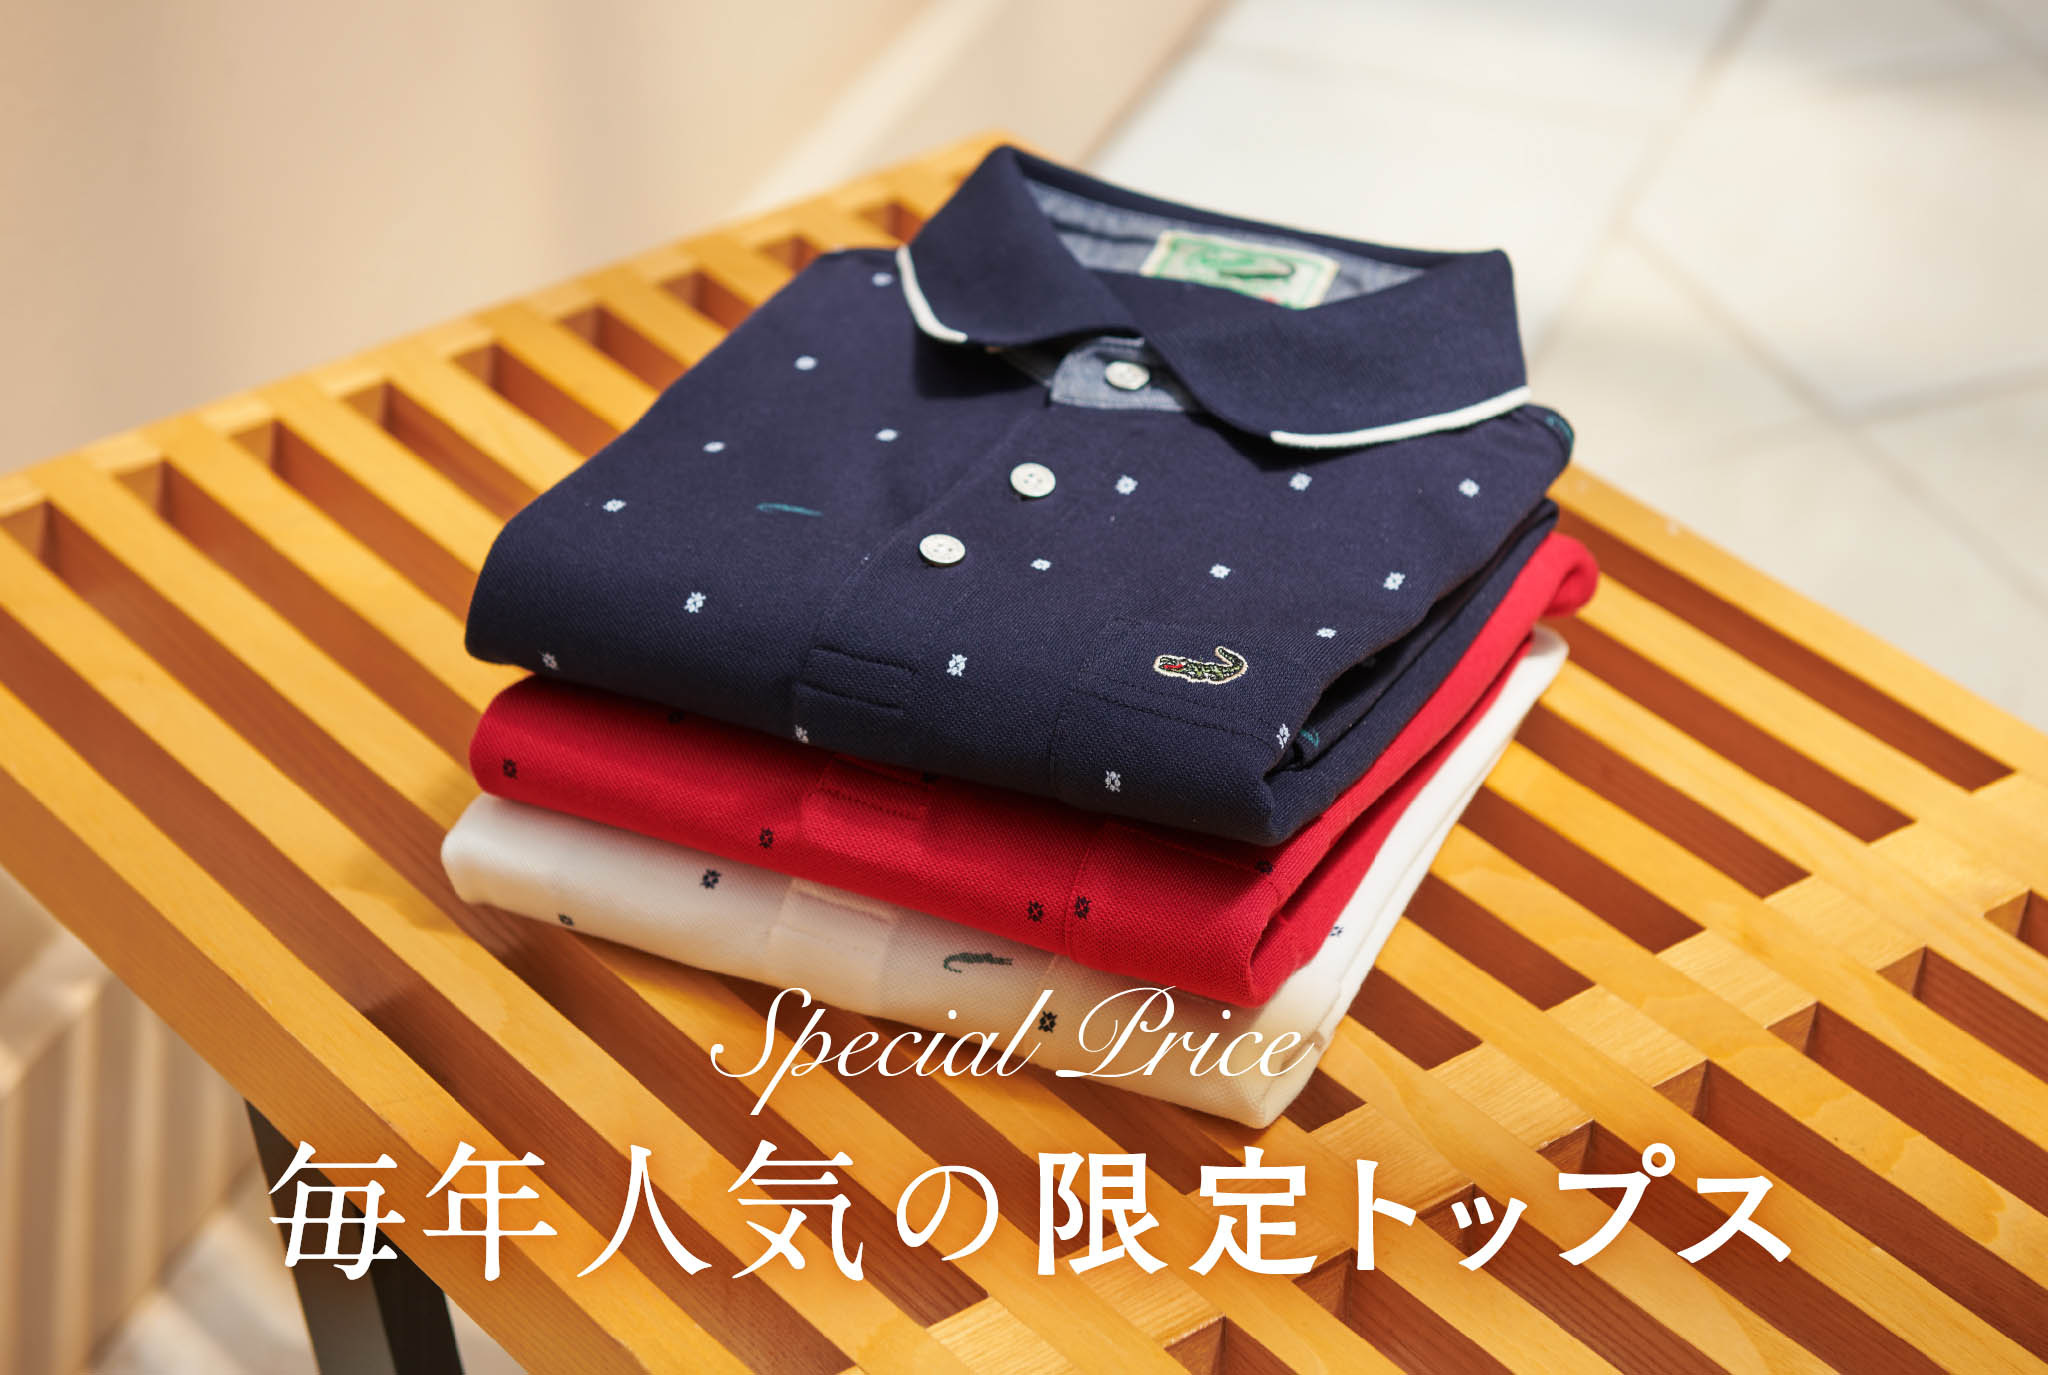 Special Price 毎年人気の限定トップス